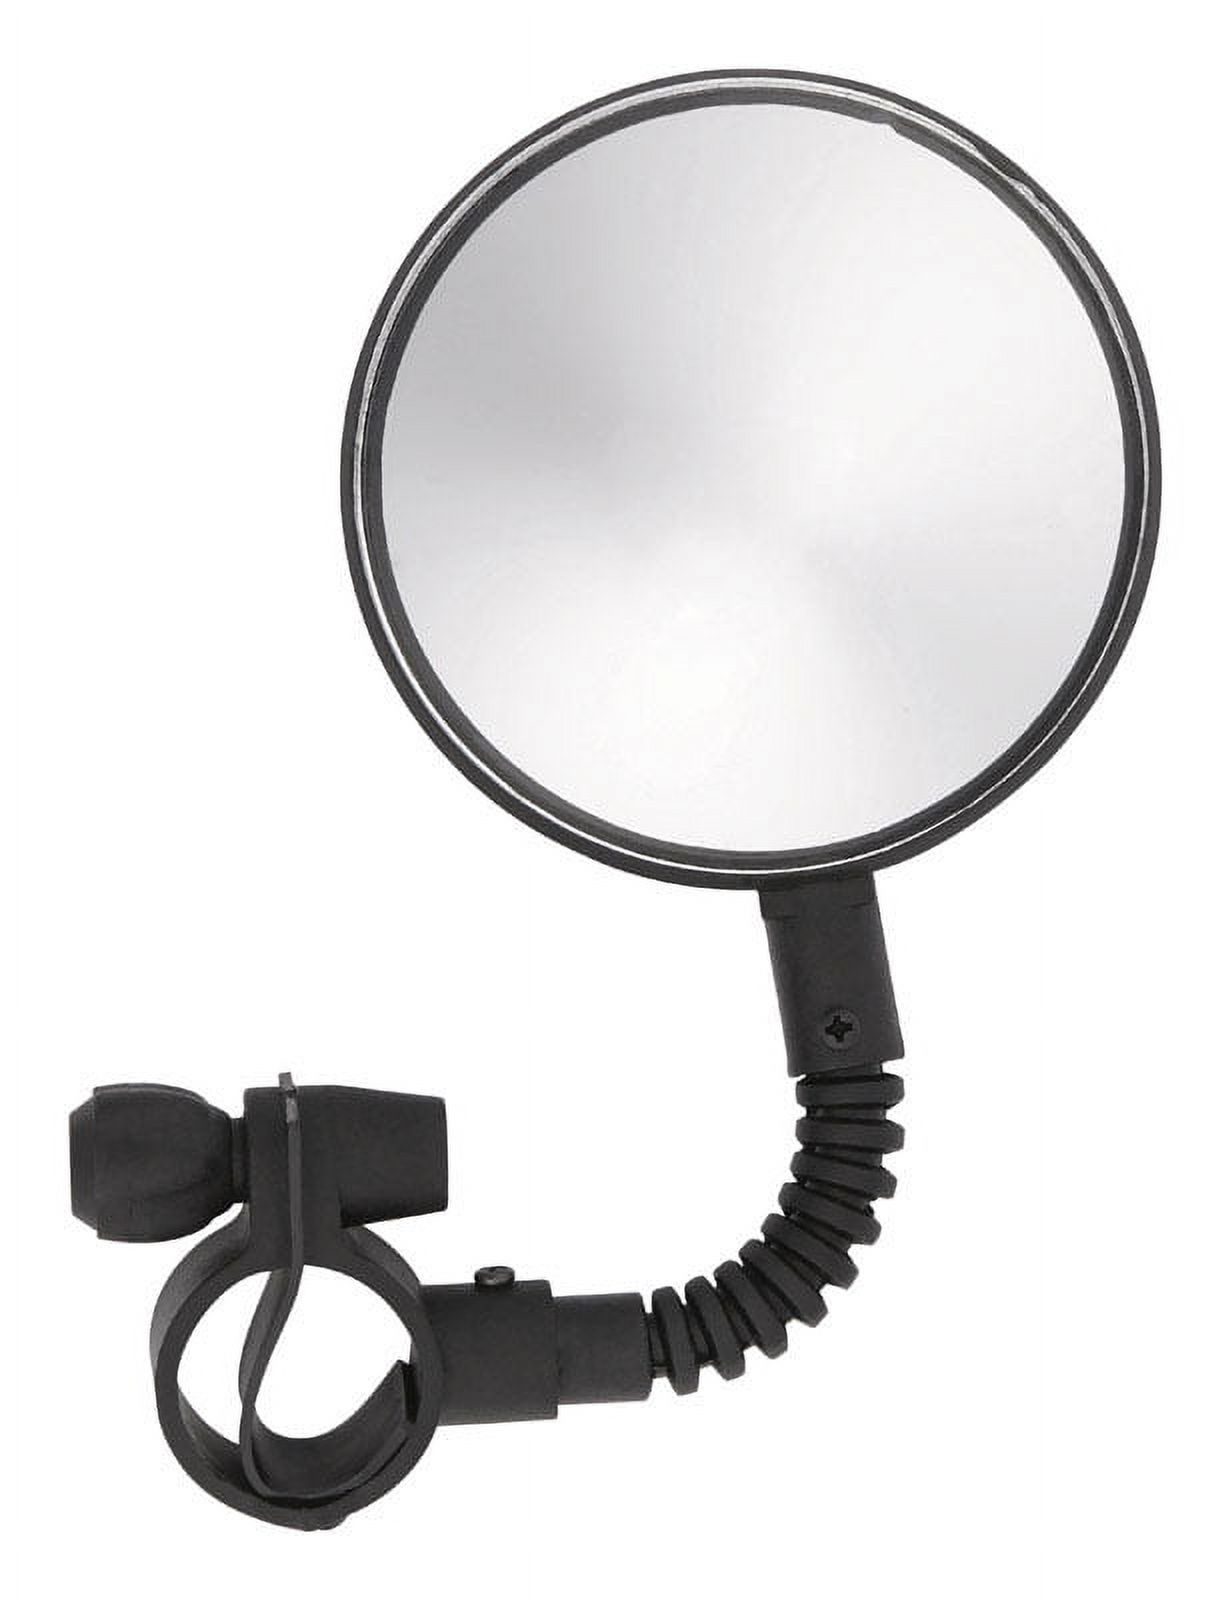 Bell Sports Cycle Products 7015989 Black Flexible Safety Mirror - image 2 of 2